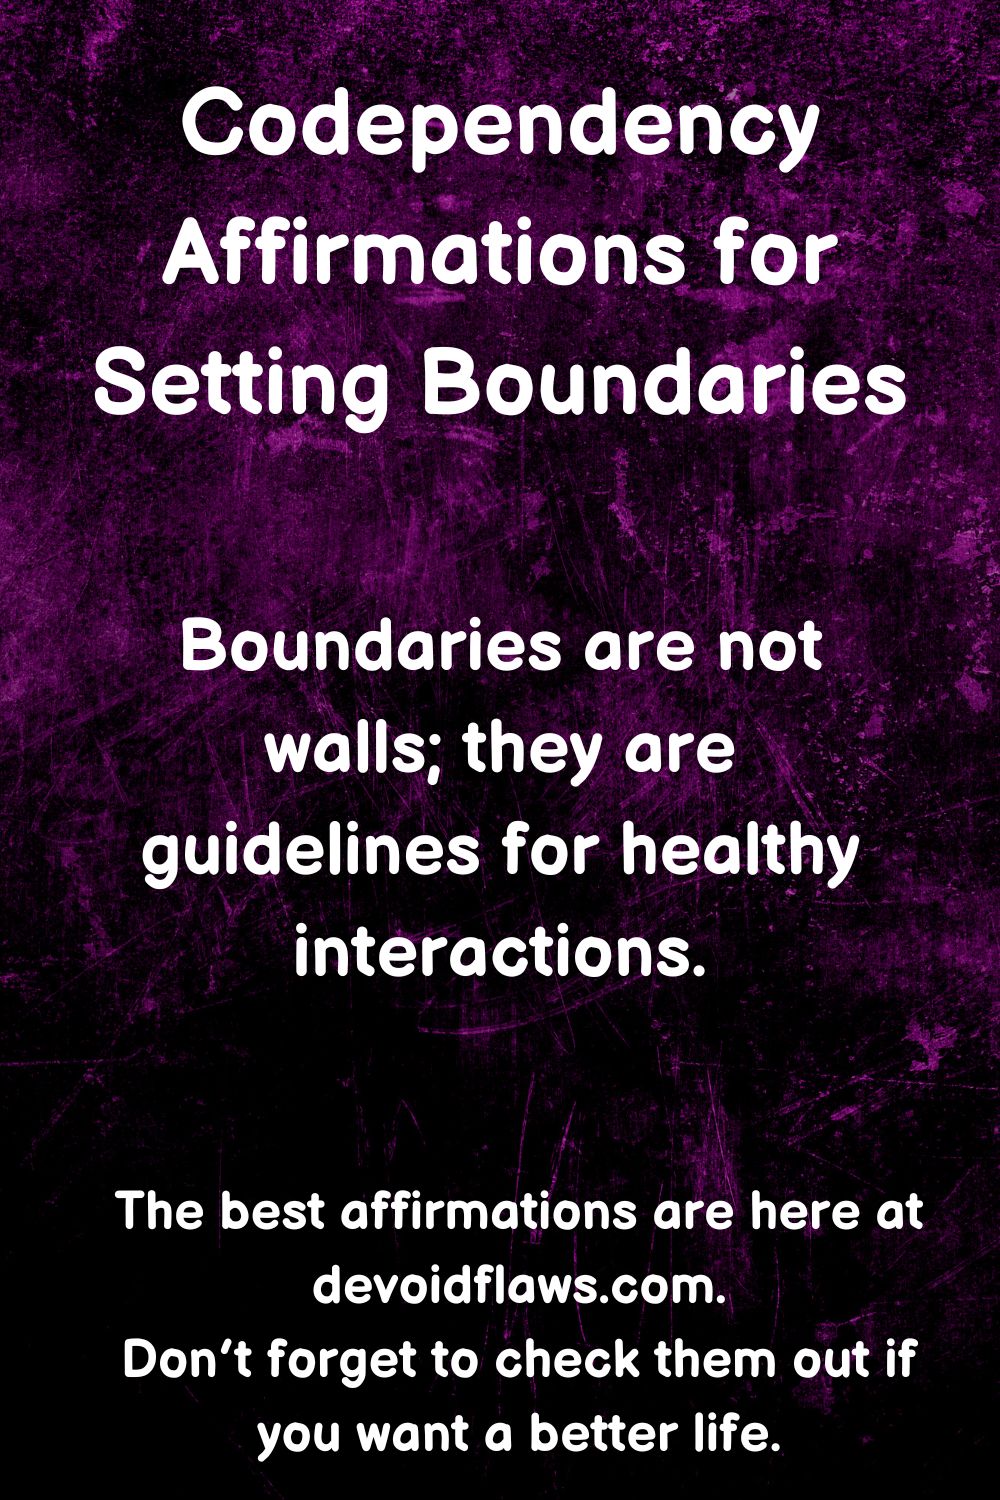 codependency affirmation for setting boundaries